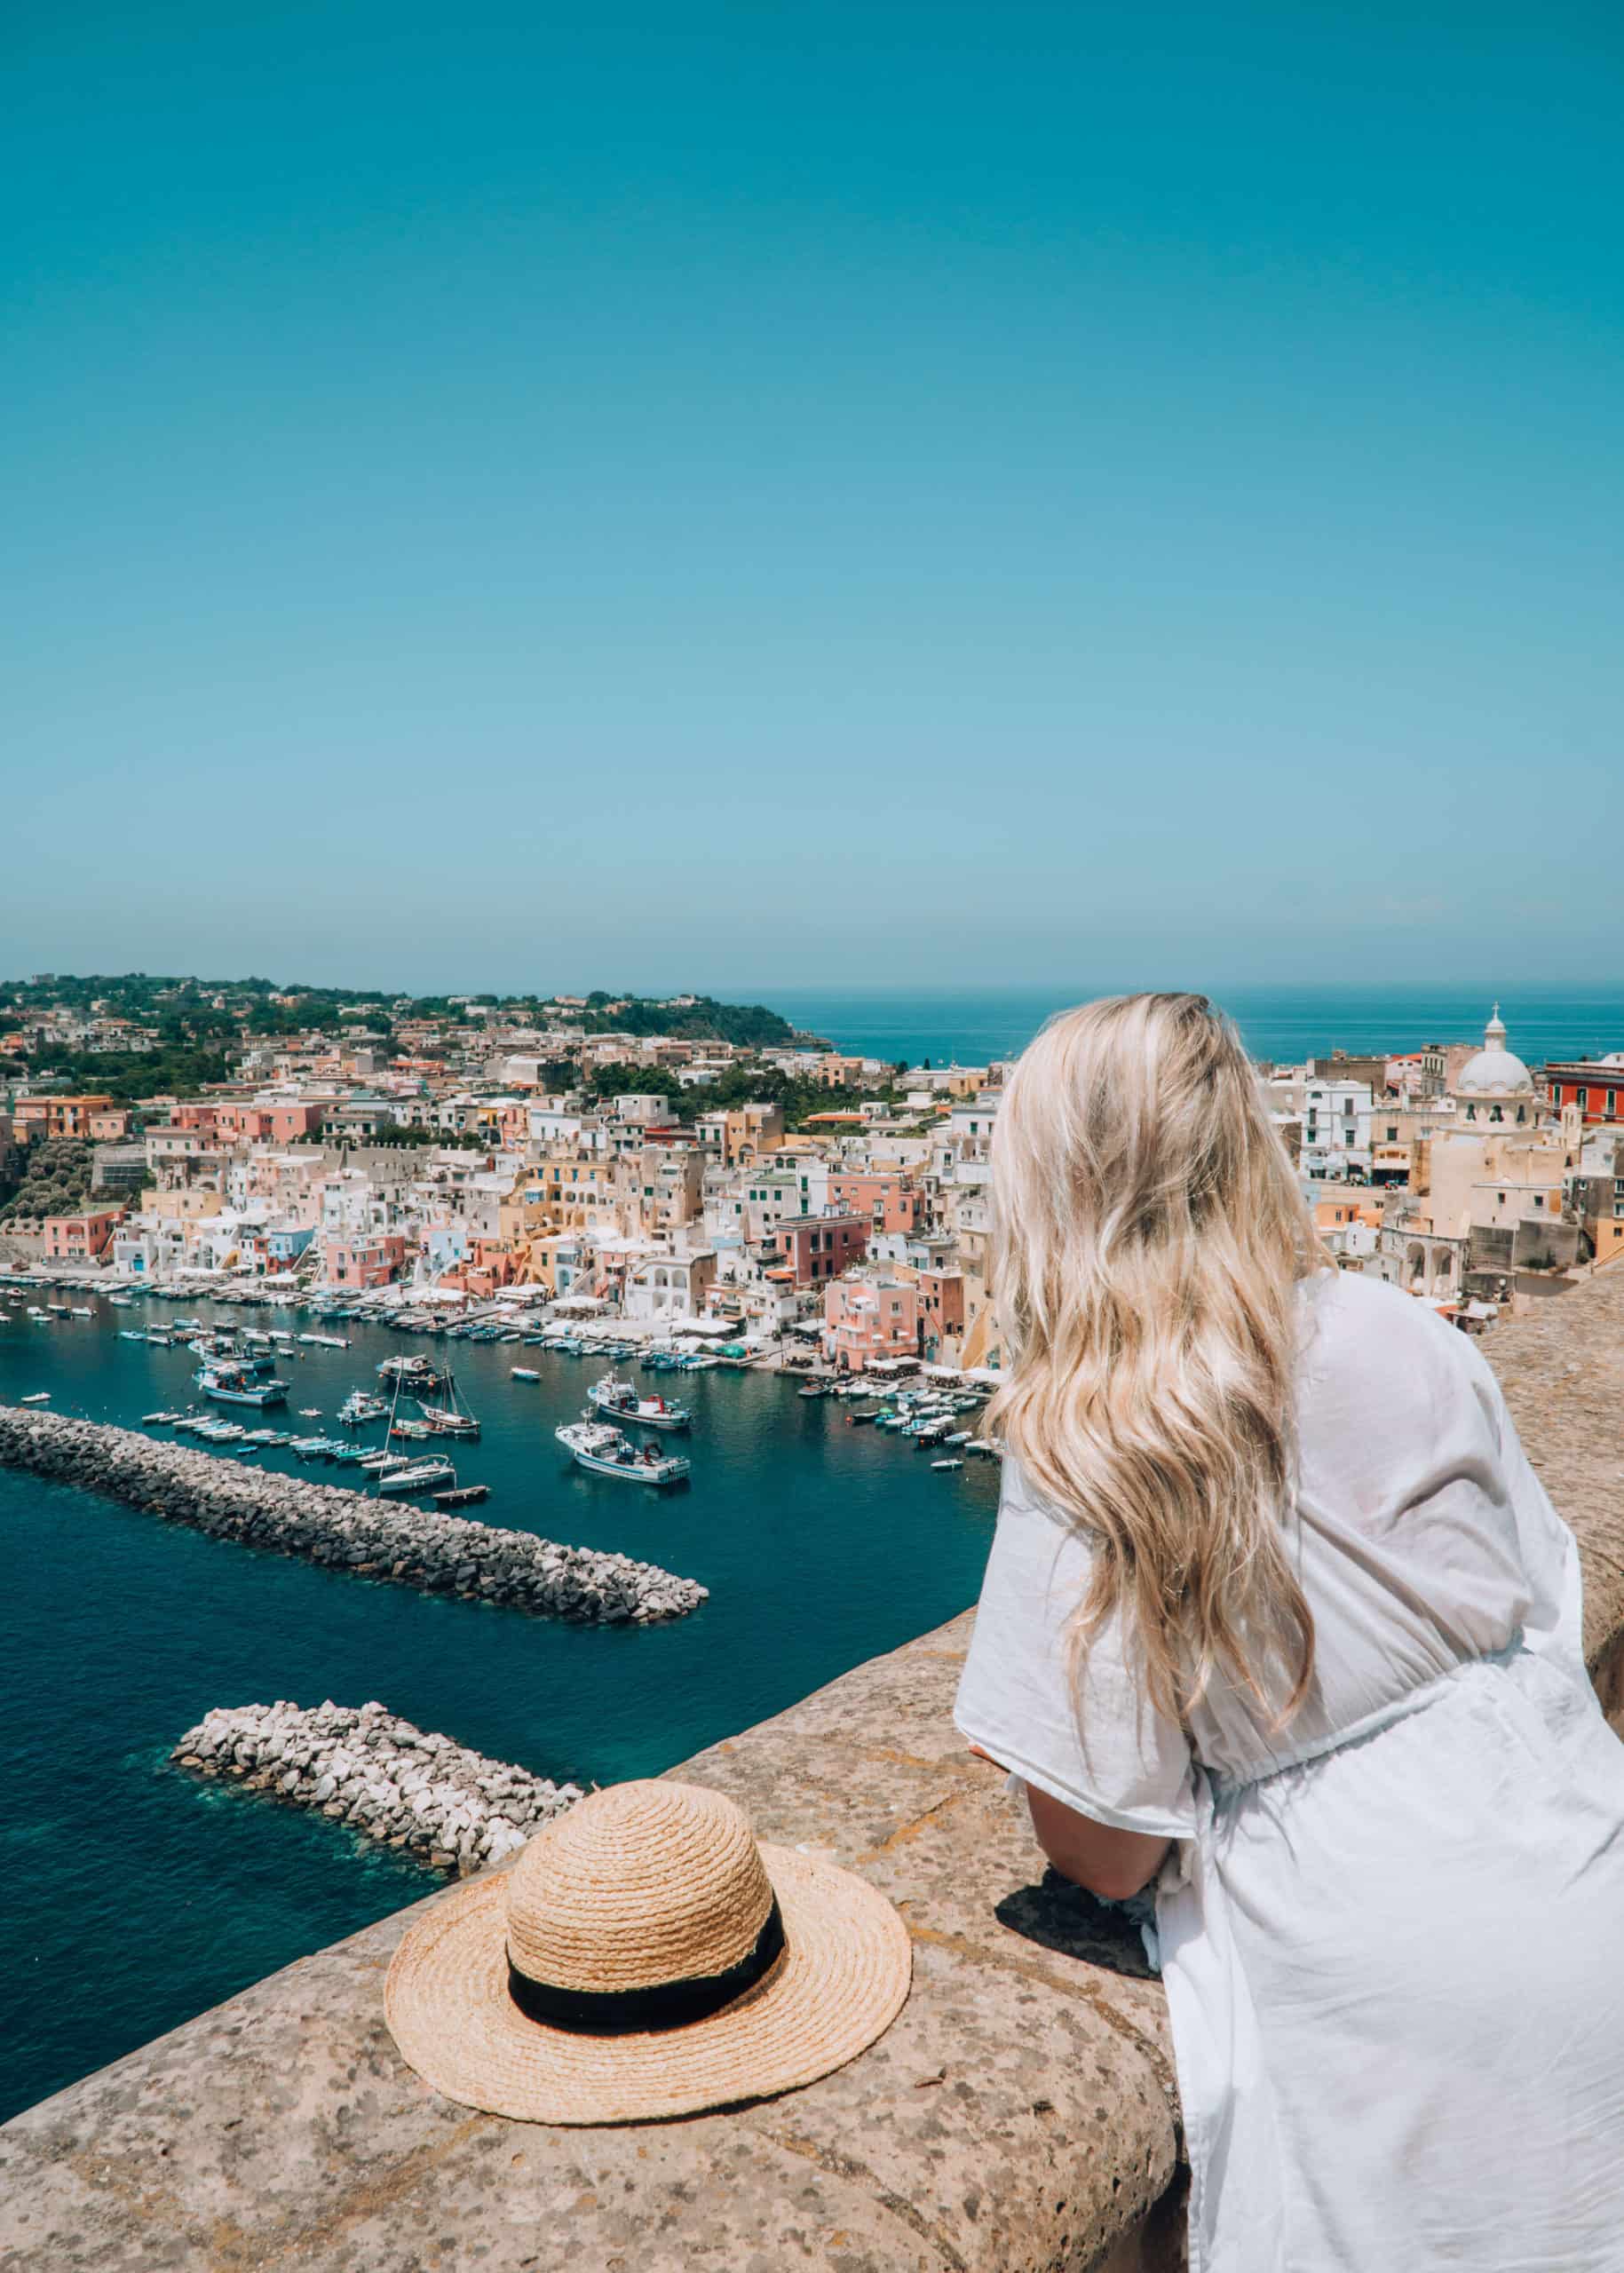 Taking in the views from Terra Murata in Procida, Italy